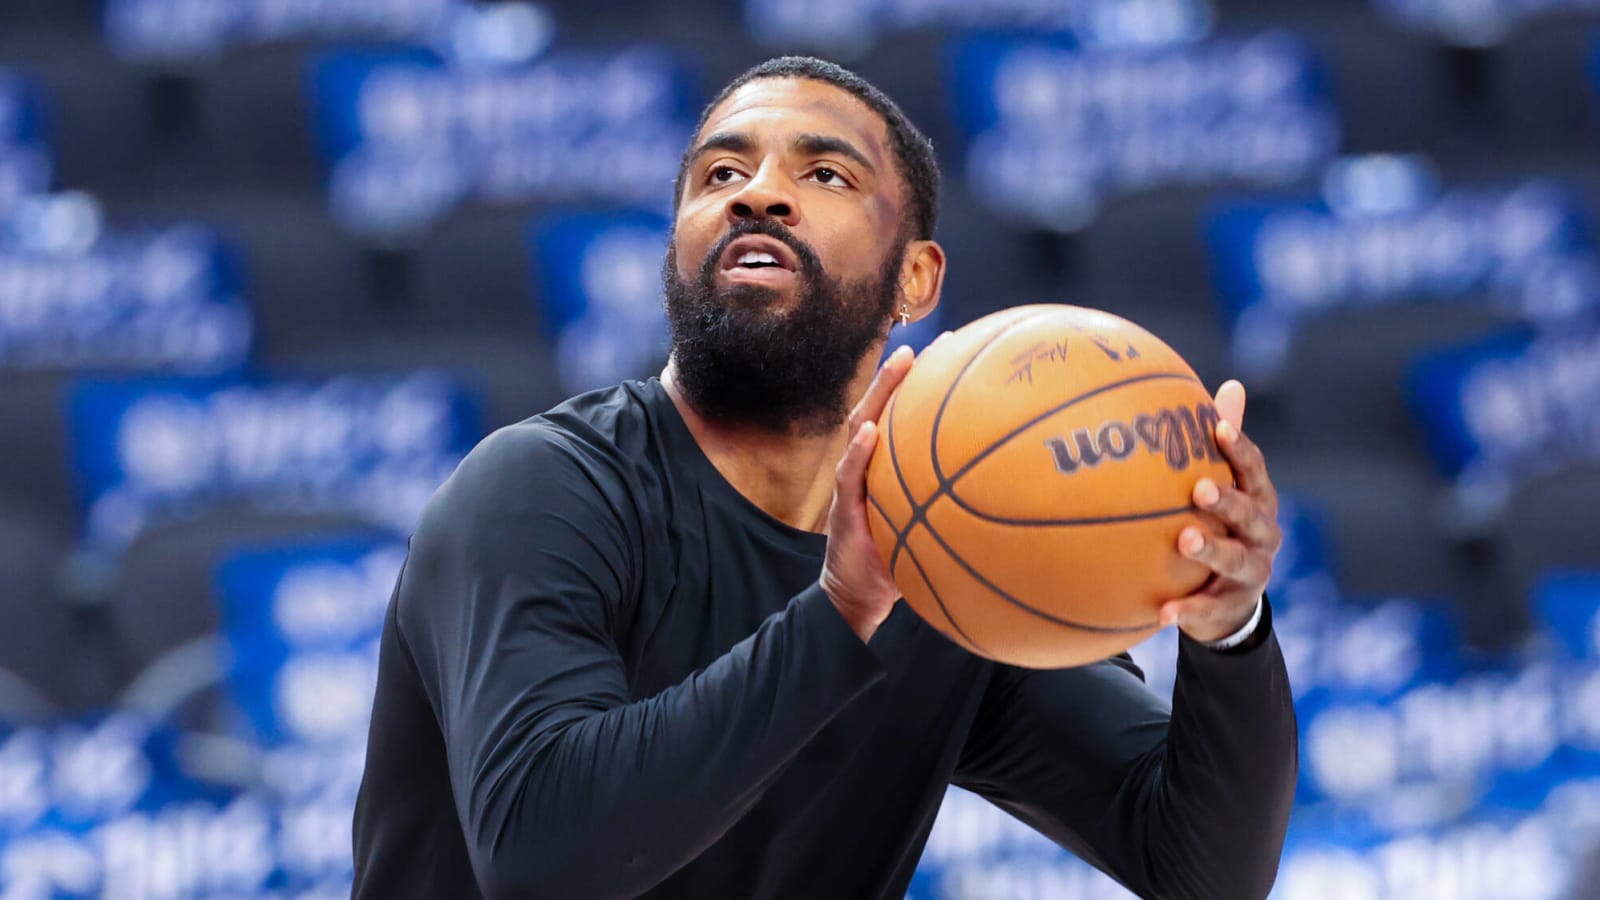 Kyrie Irving Opens Up About Struggles That Led Him to Mavs